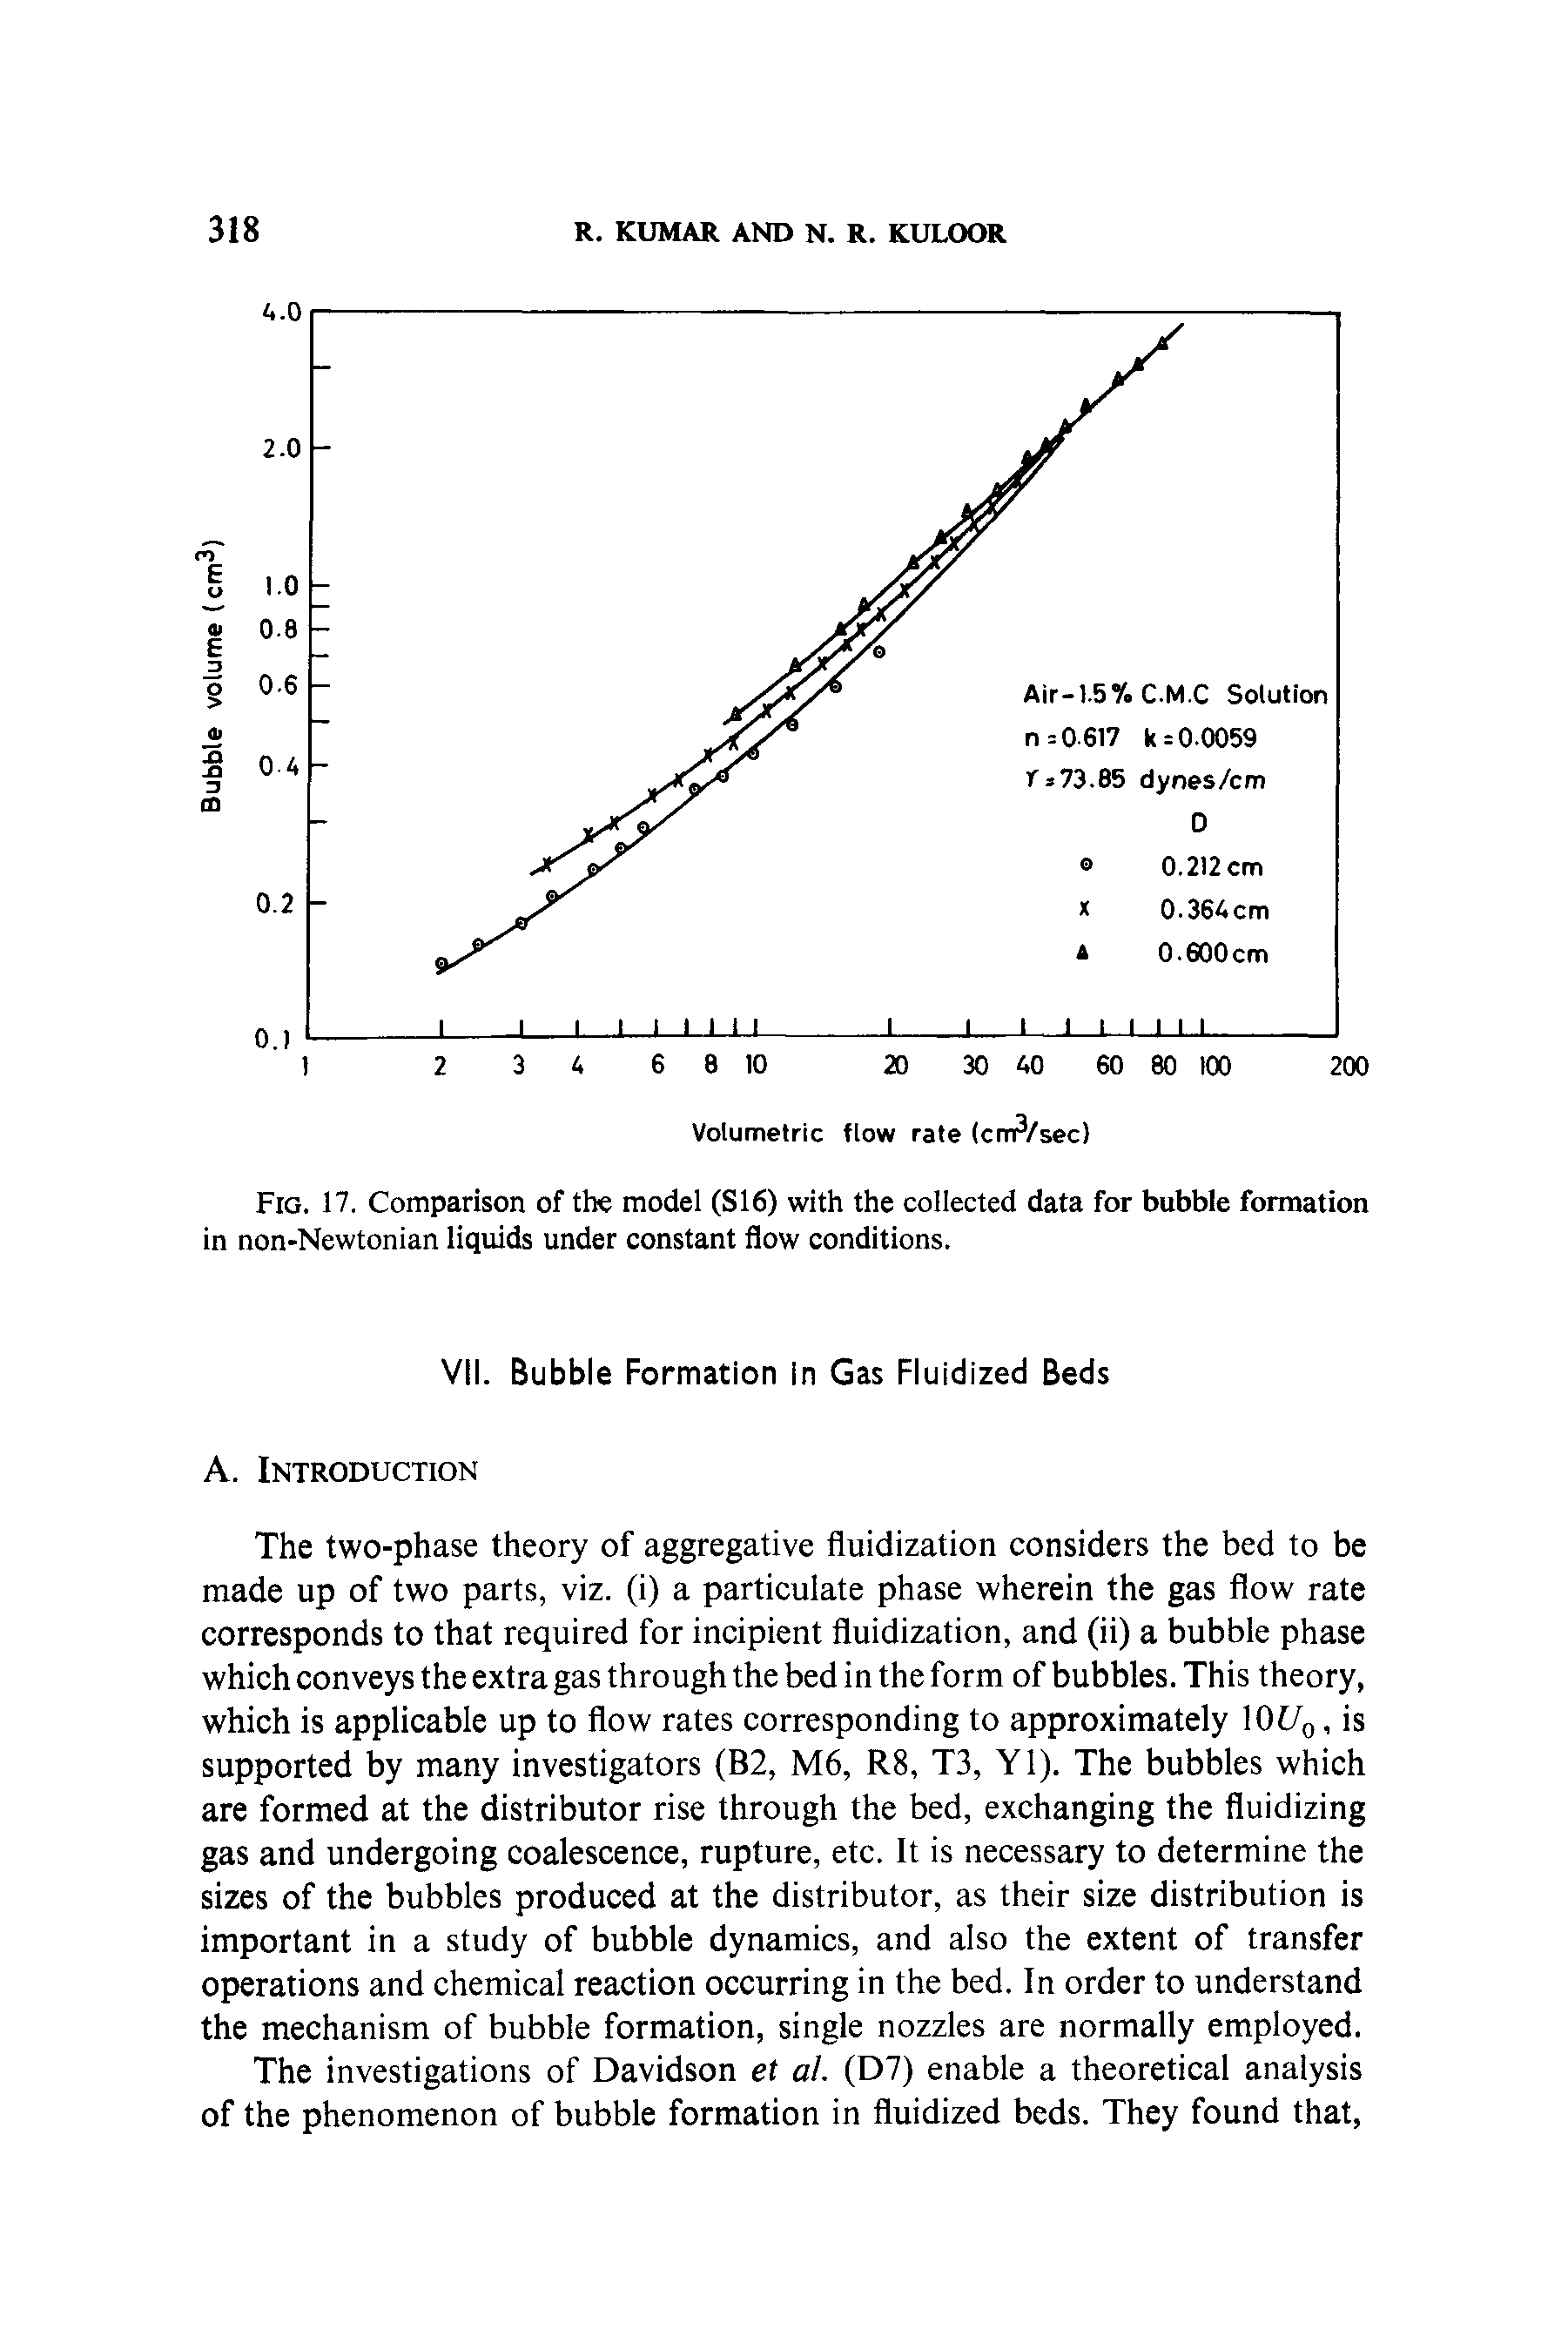 Fig. 17. Comparison of the model (S16) with the collected data for bubble formation in non-Newtonian liquids under constant flow conditions.